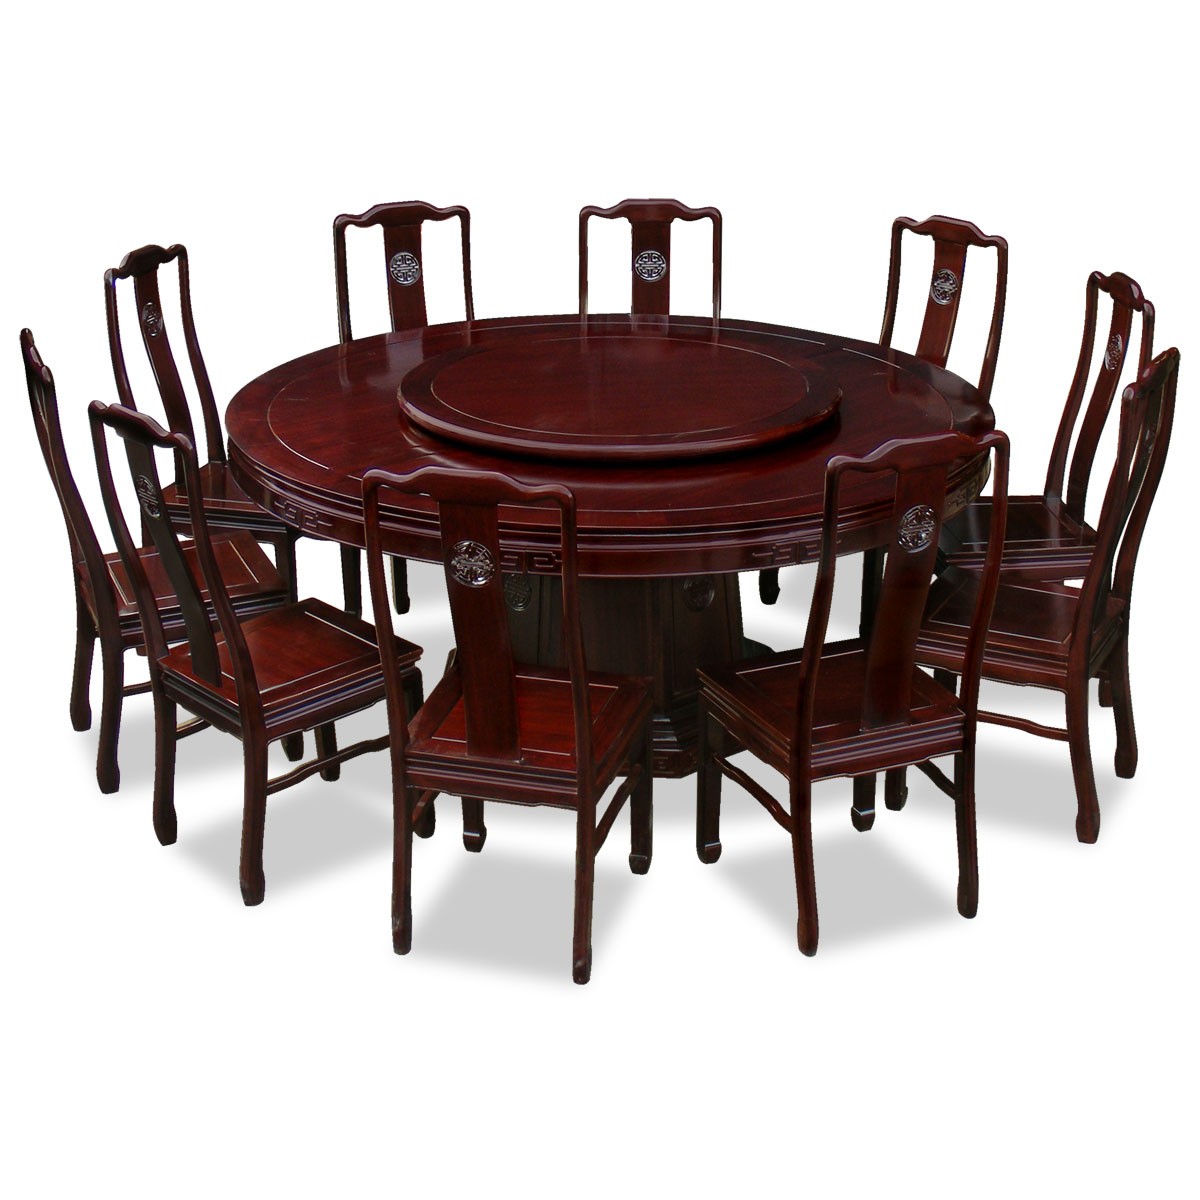 72in rosewood longevity design round dining table with 10 chairs